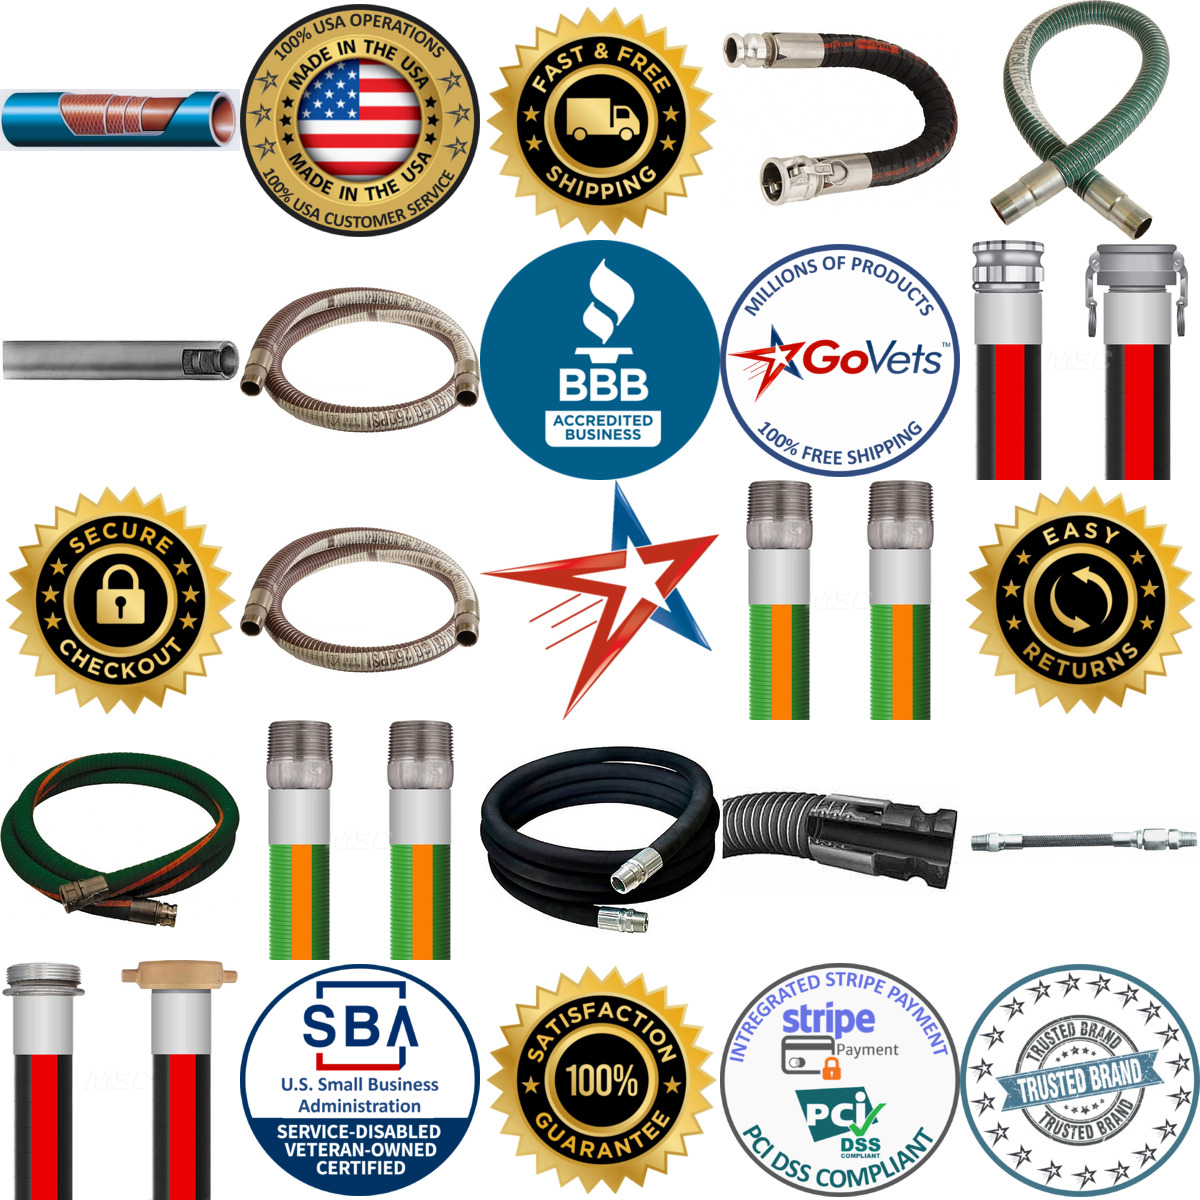 A selection of Chemical and Petroleum Hose products on GoVets